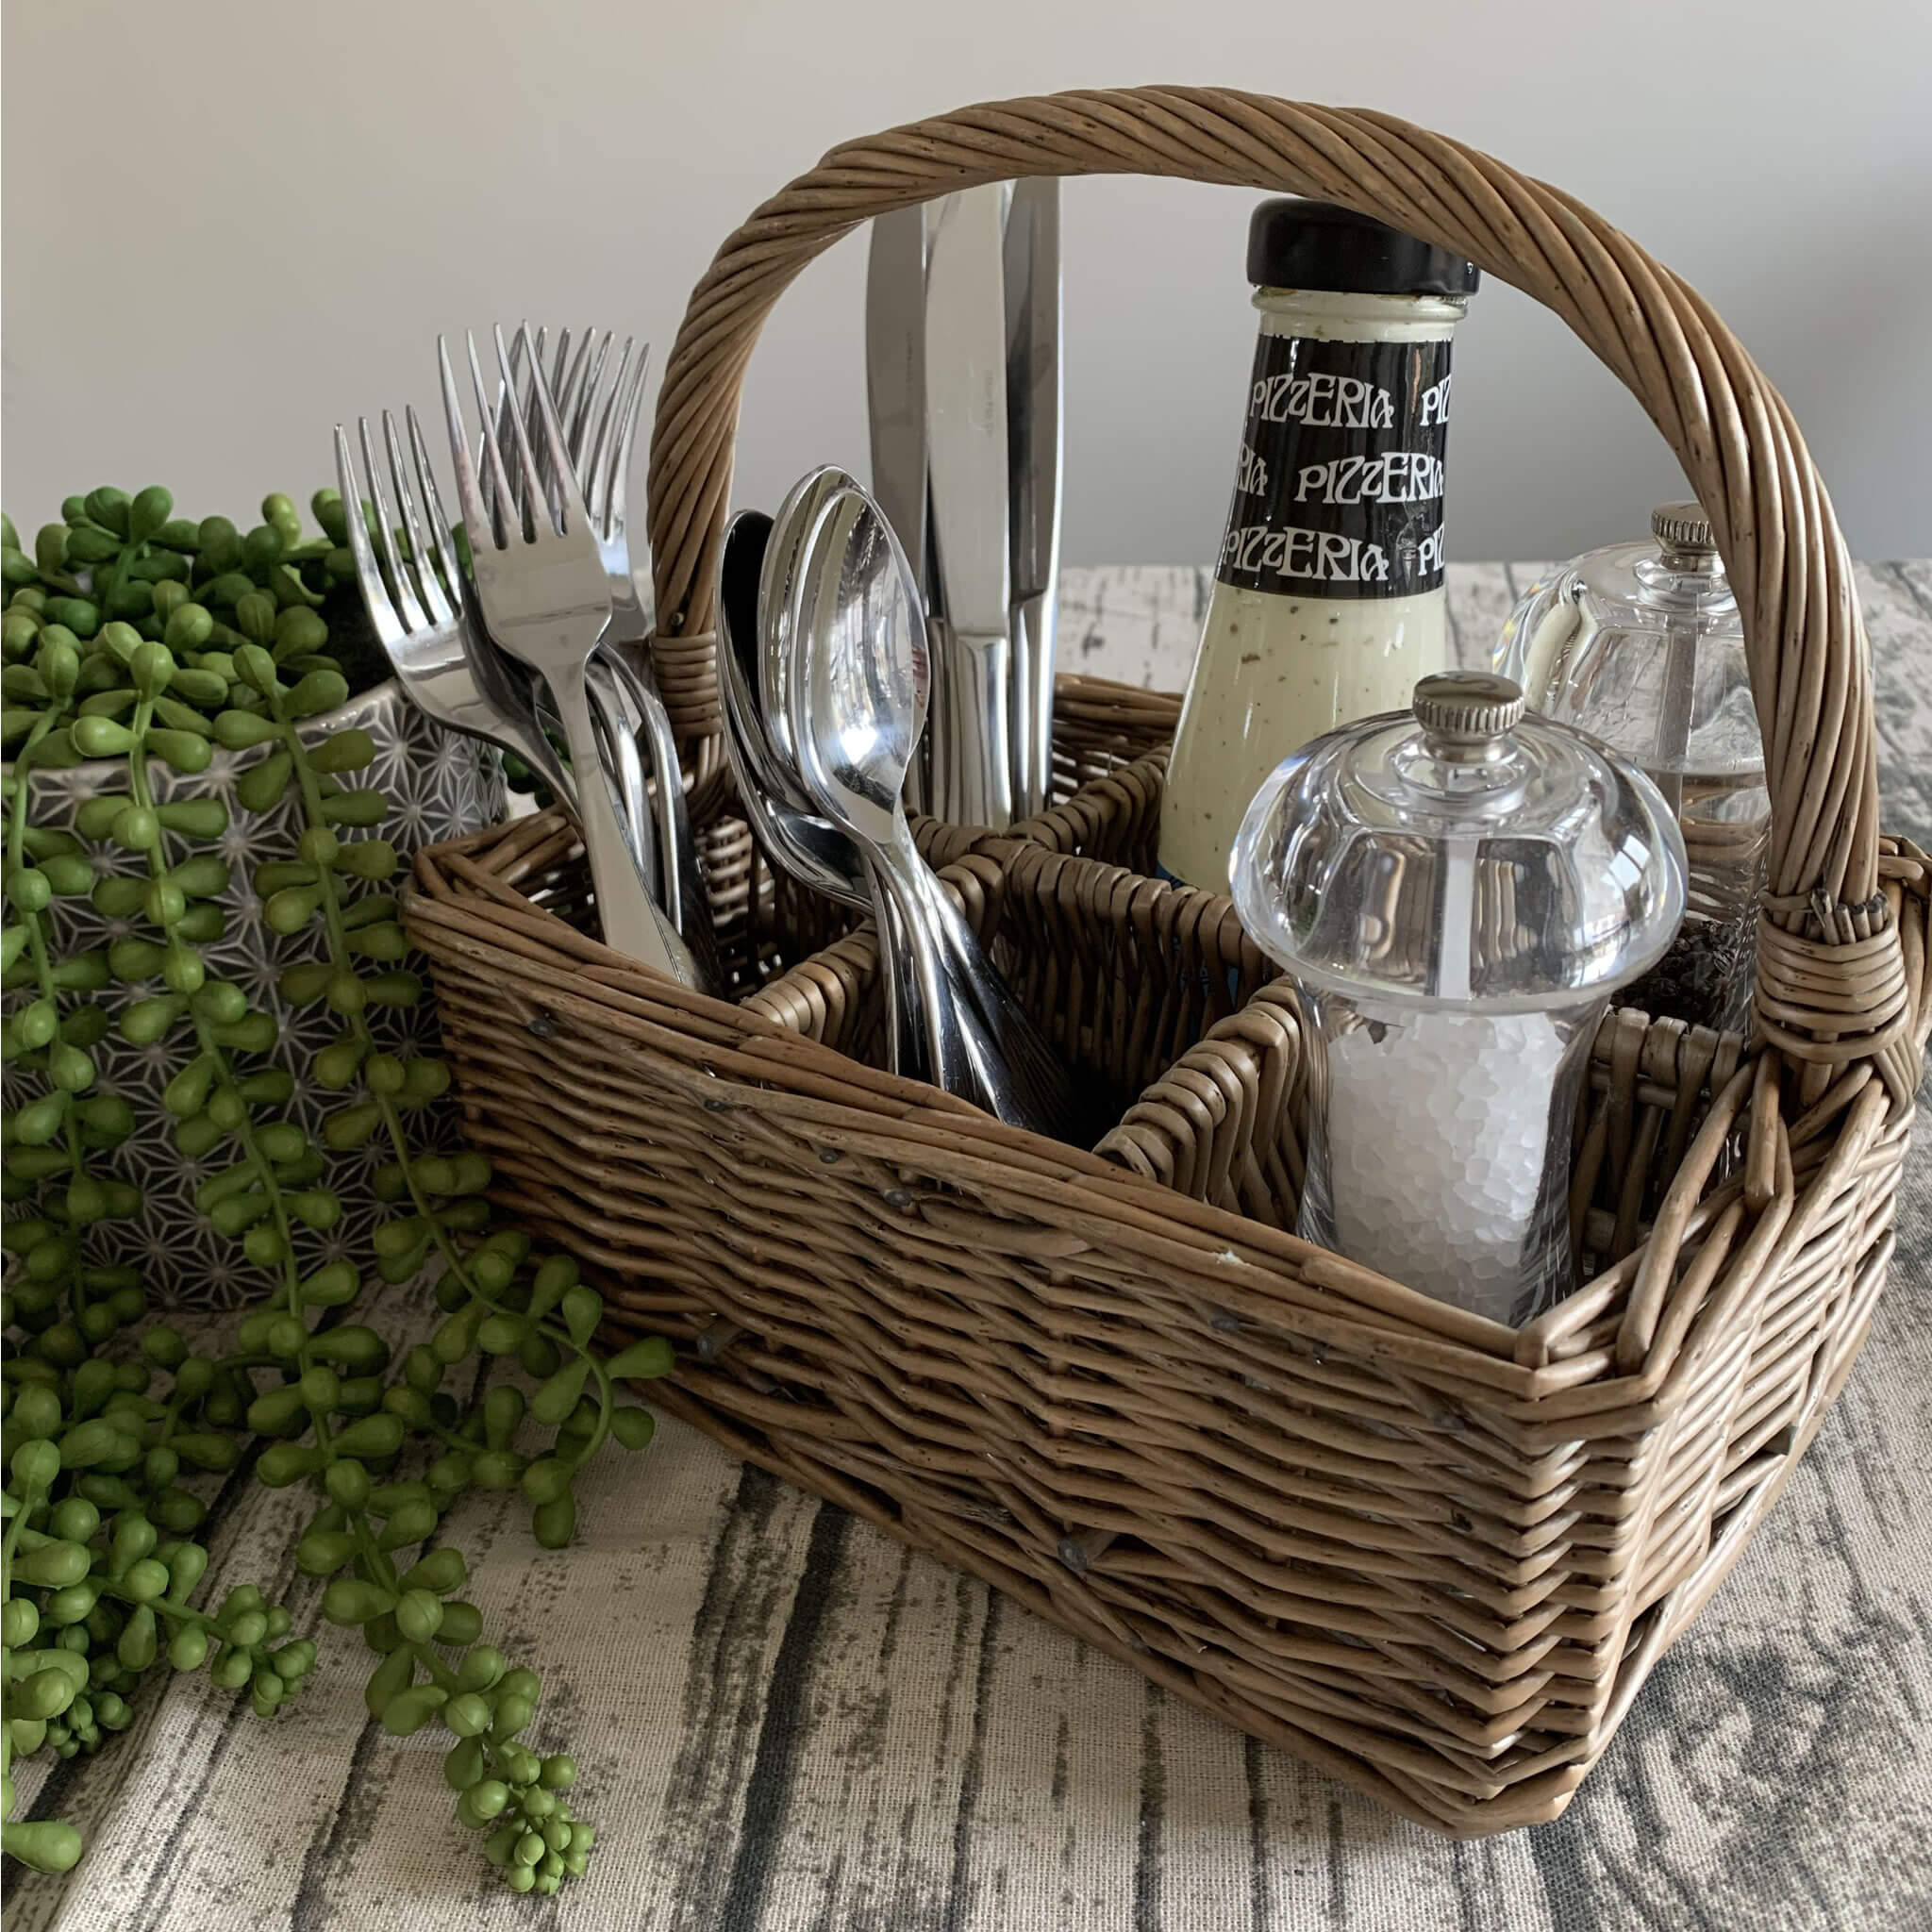 Cutlery & Condiment Holder 6 Section - Alfresco Dining Company